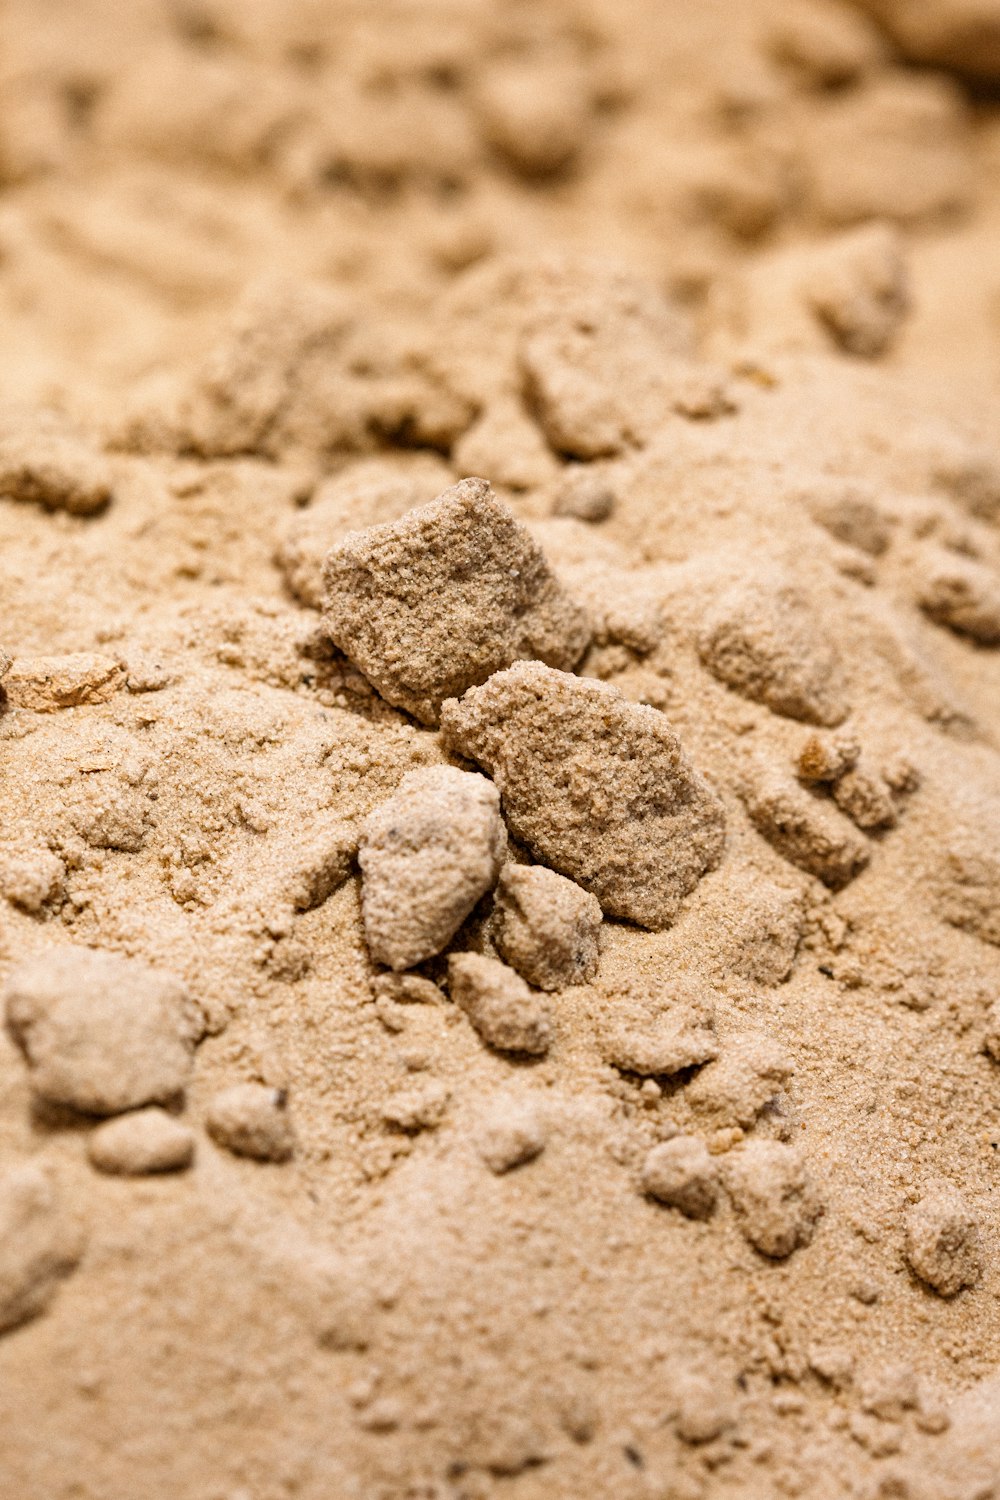 a close up of a pile of dirt